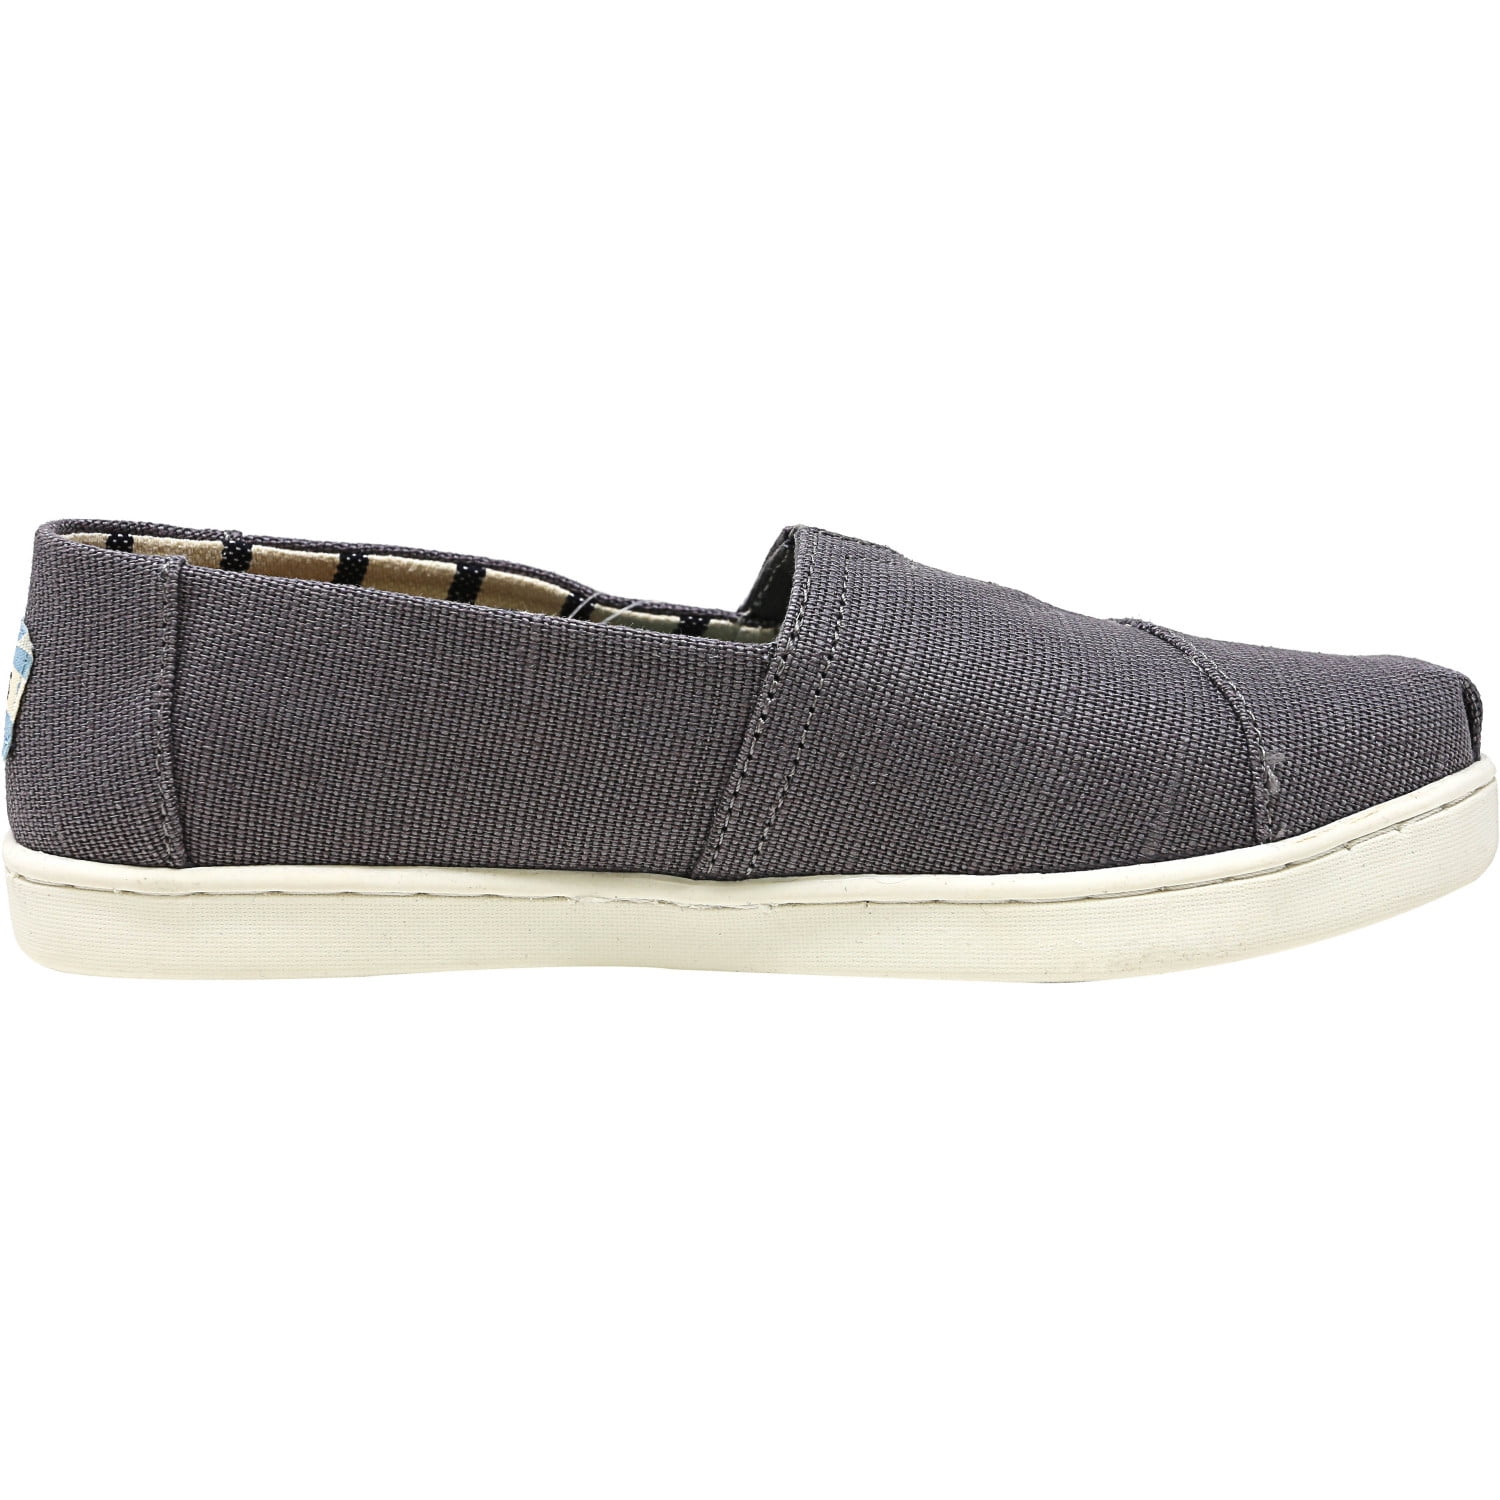 Toms Classic Heritage Canvas Slip-On Shoes - 6M - Shade | Walmart Canada